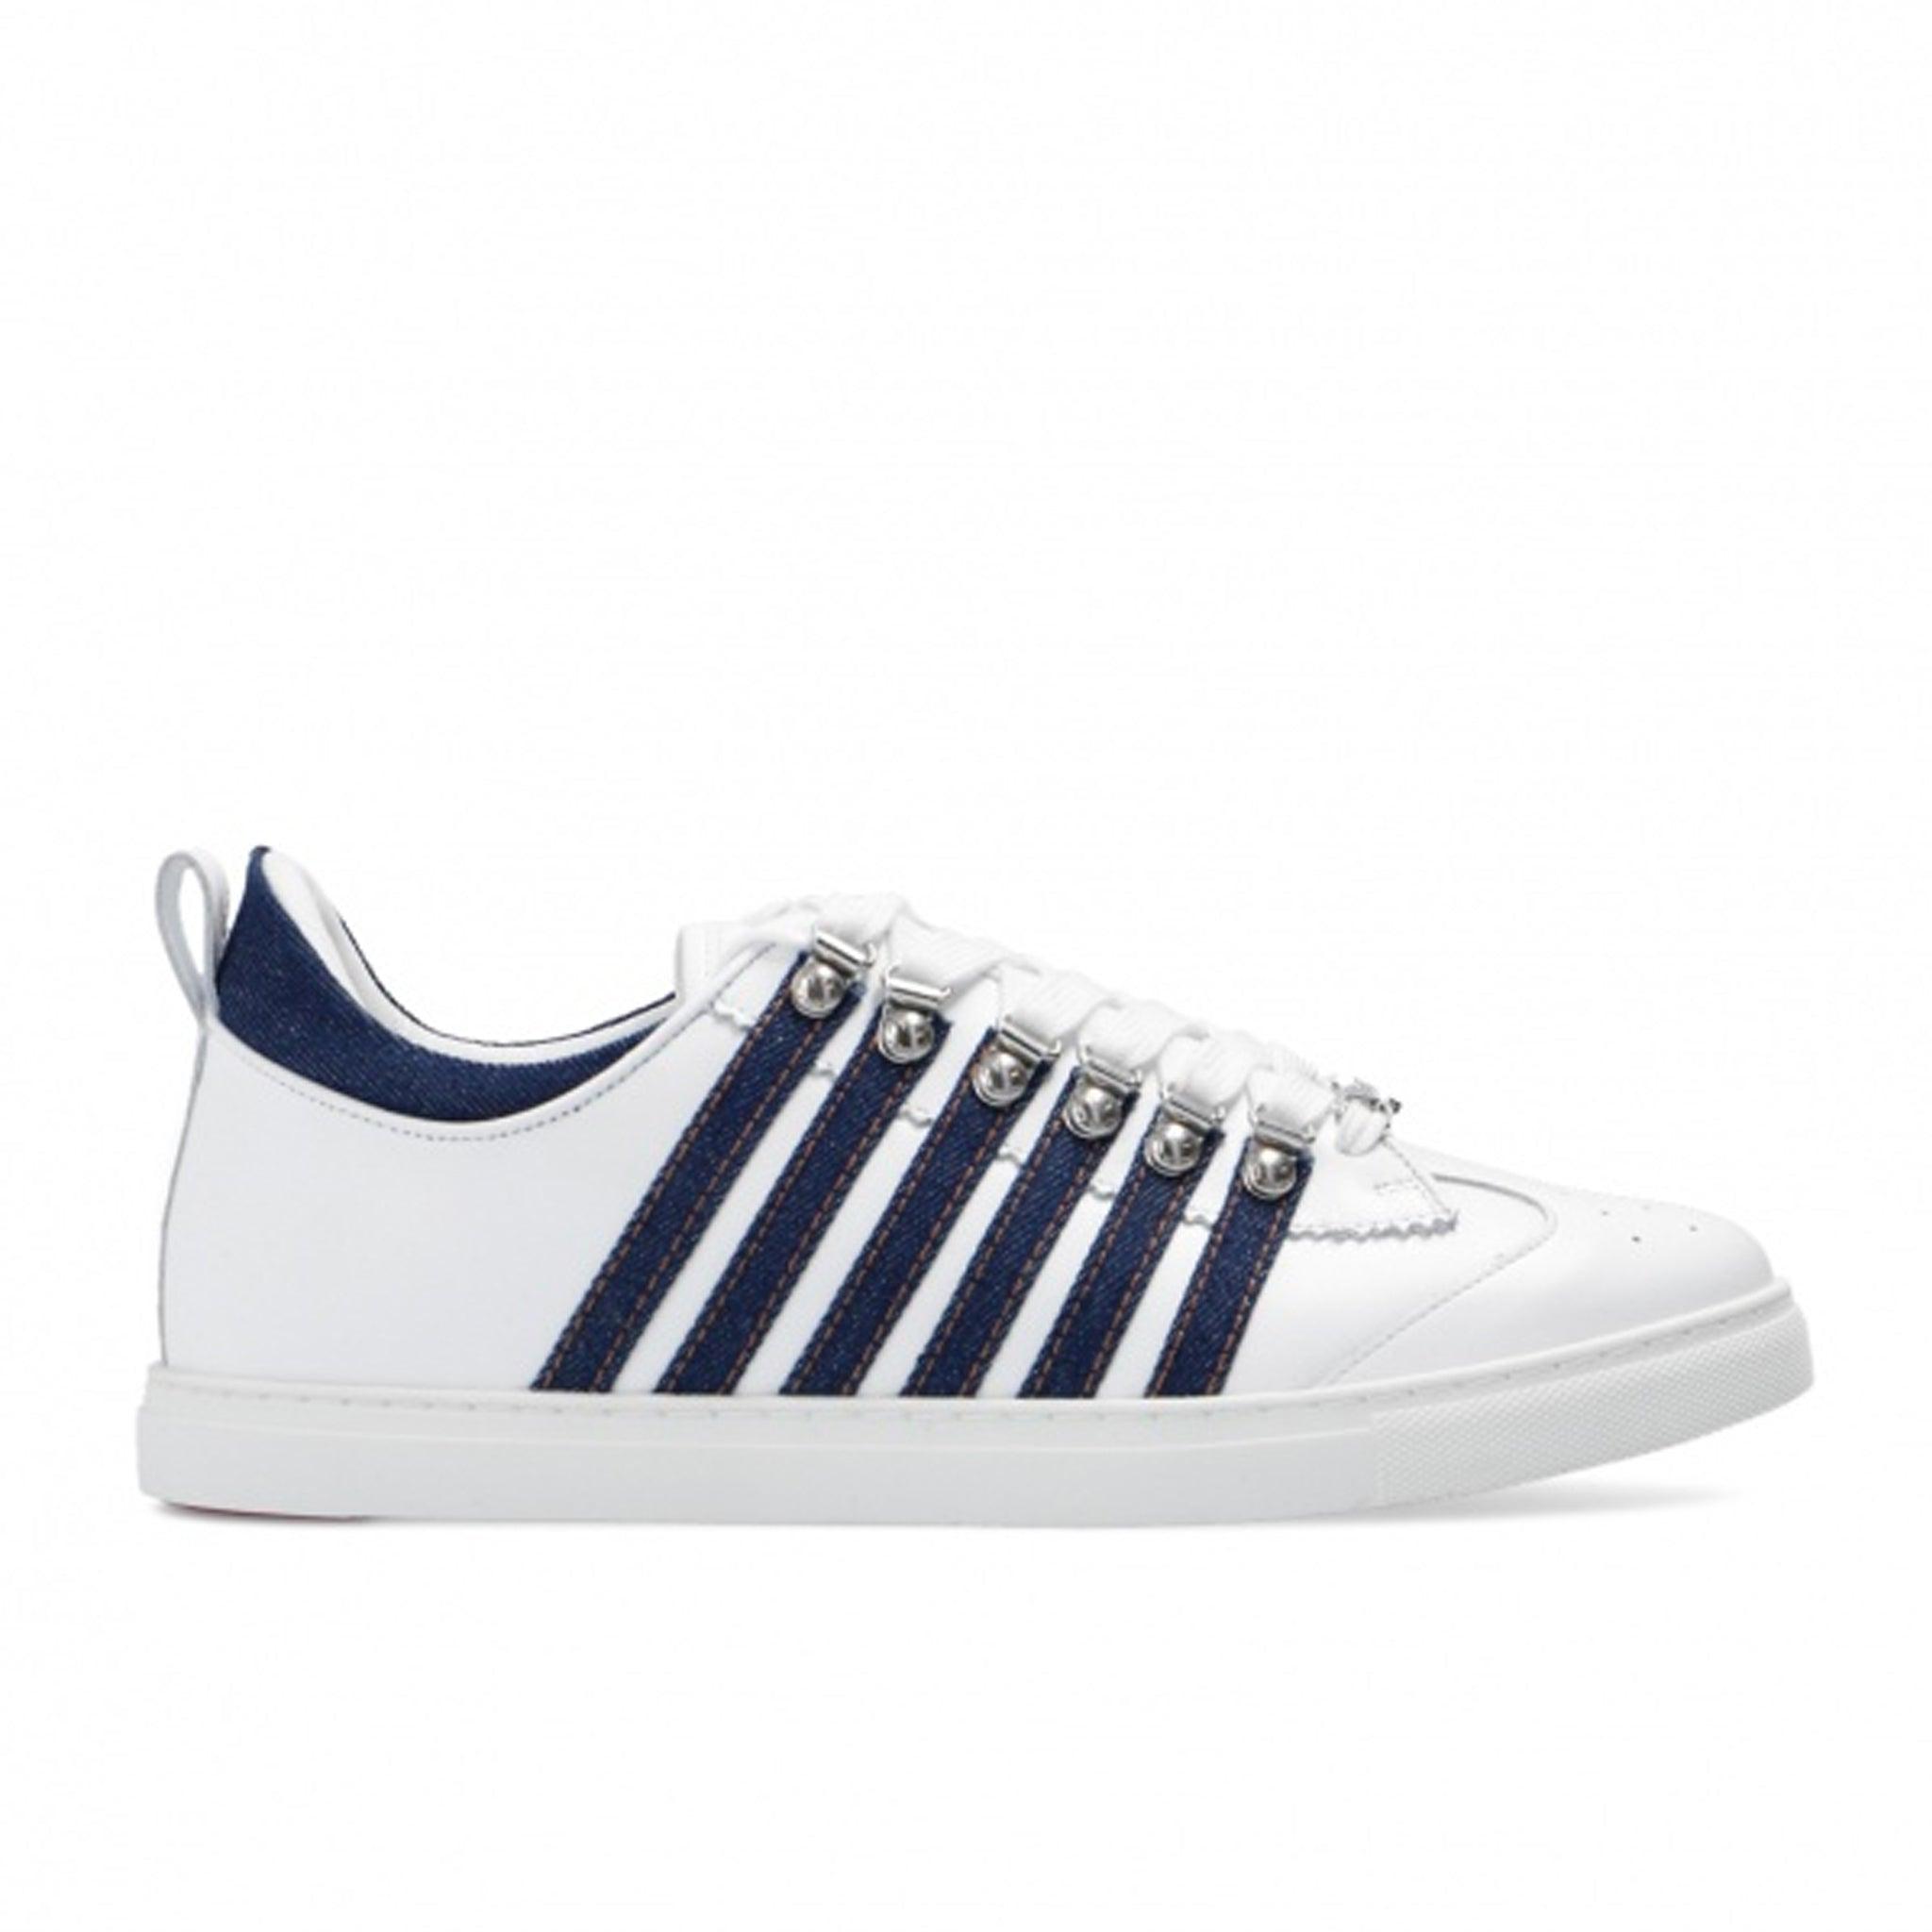 DSquared² Leather Sneakers in Blue for Men | Lyst